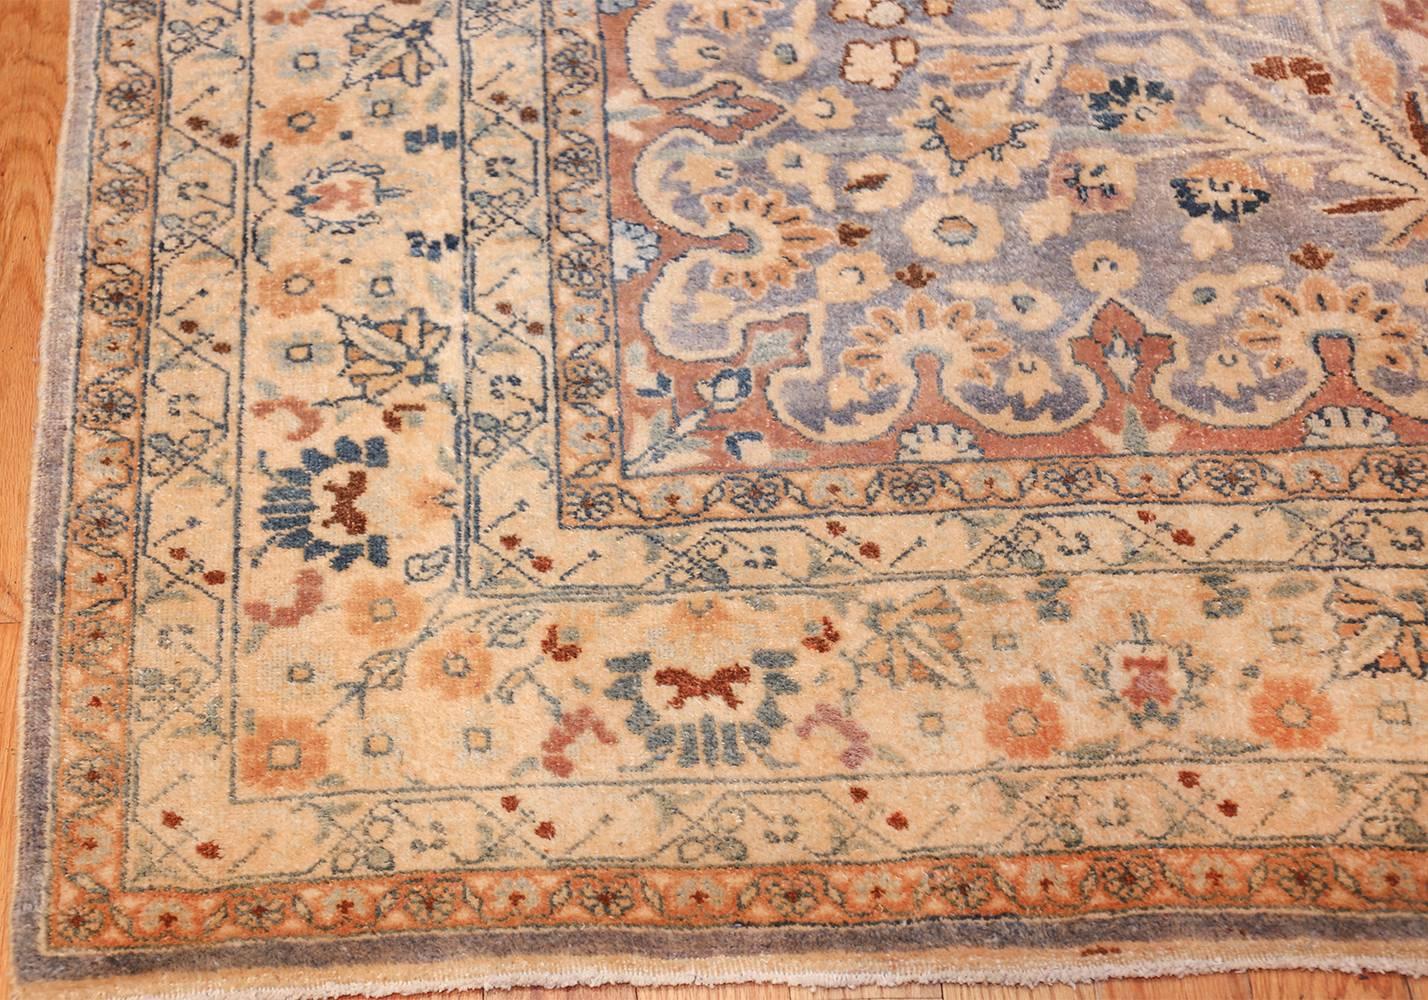 The region of Khorassan in northeastern Persia has been famed for Fine antique rugs going back to Timurid times in the late middle ages. In the later nineteenth and twentieth centuries Khorassan became a center for the production of high quality